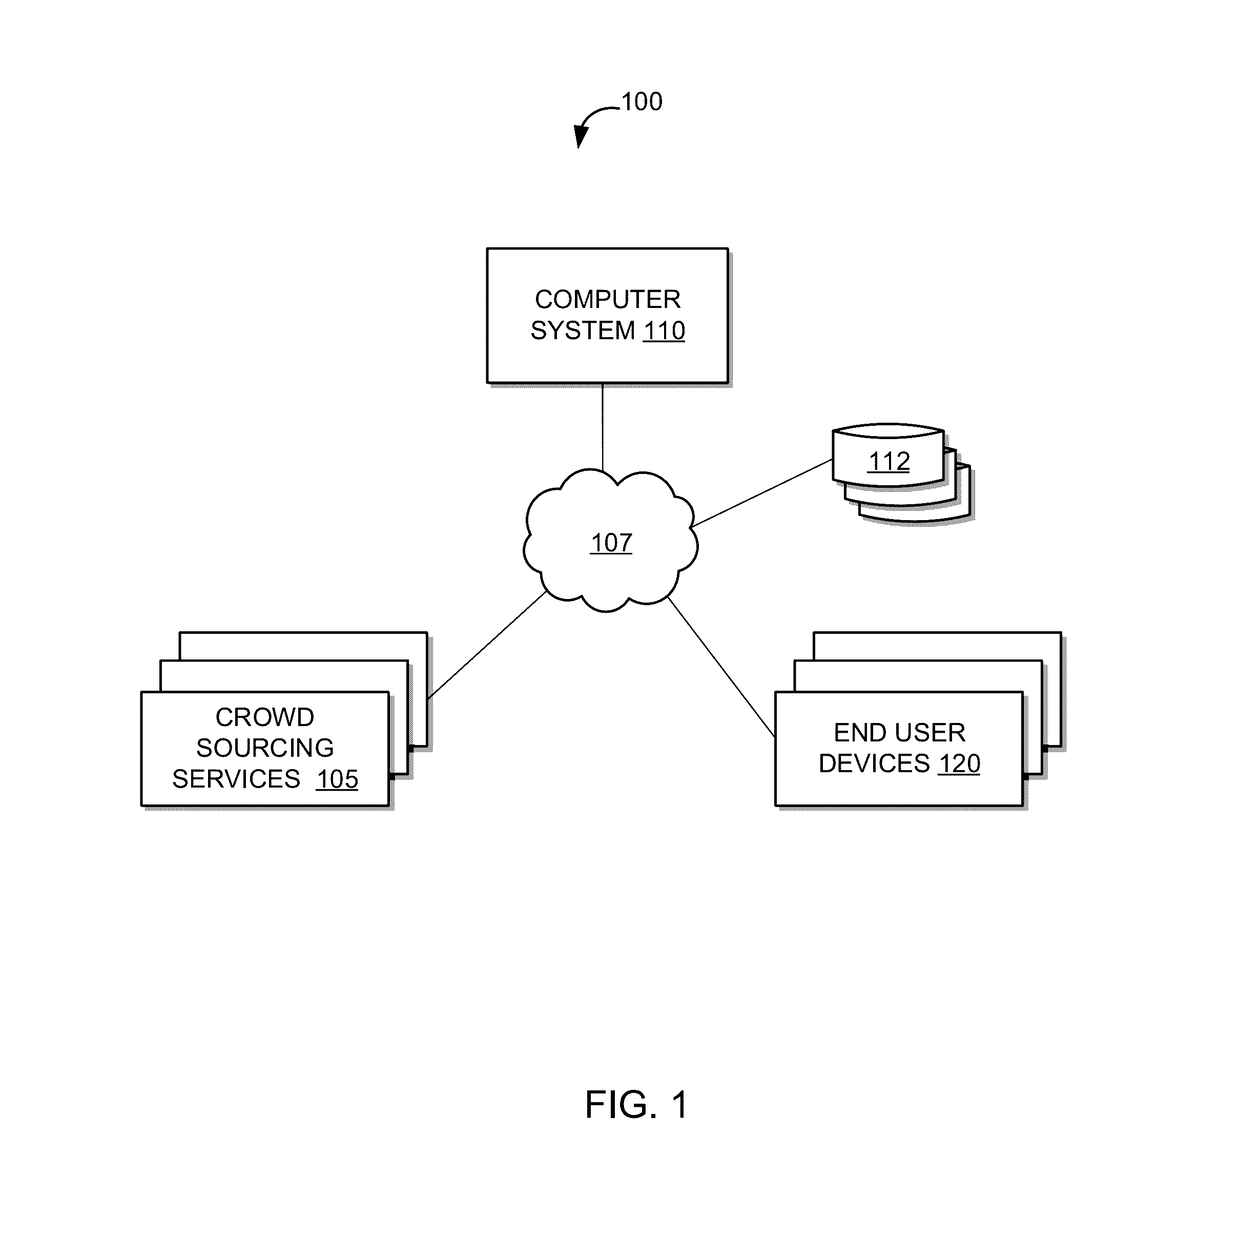 System and method of annotating utterances based on tags assigned by unmanaged crowds